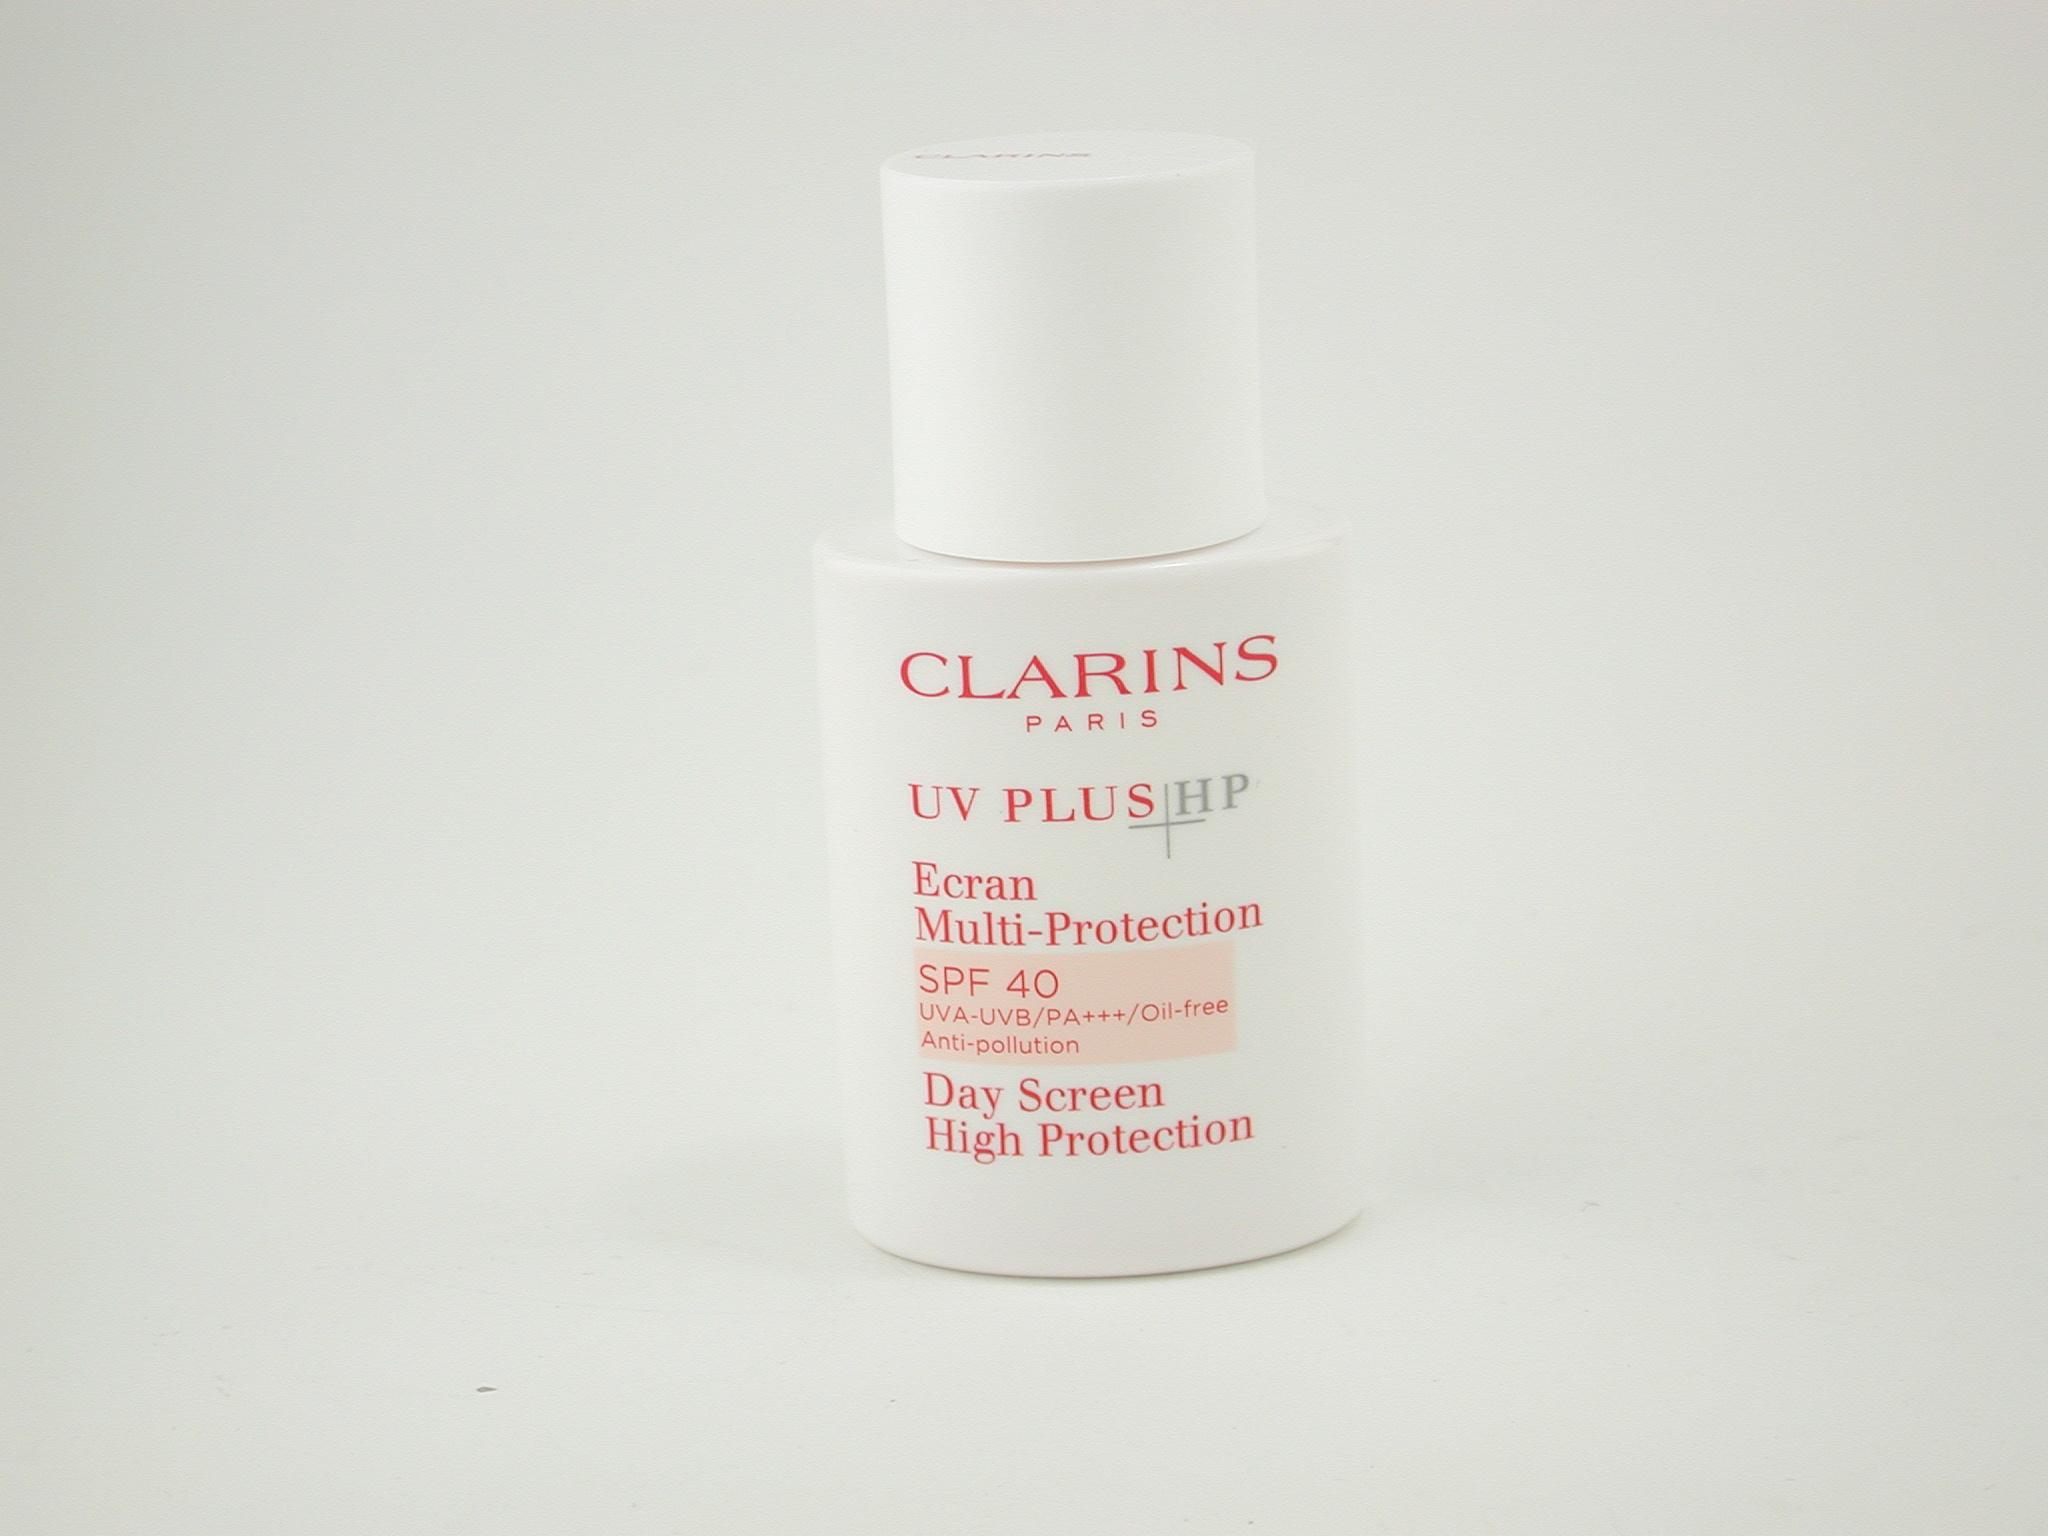 UV Plus Day Screen High Protection SPF 40 UVA-UVB/PA+++/Oil-Free ( Pink-Tinted ) Clarins Image